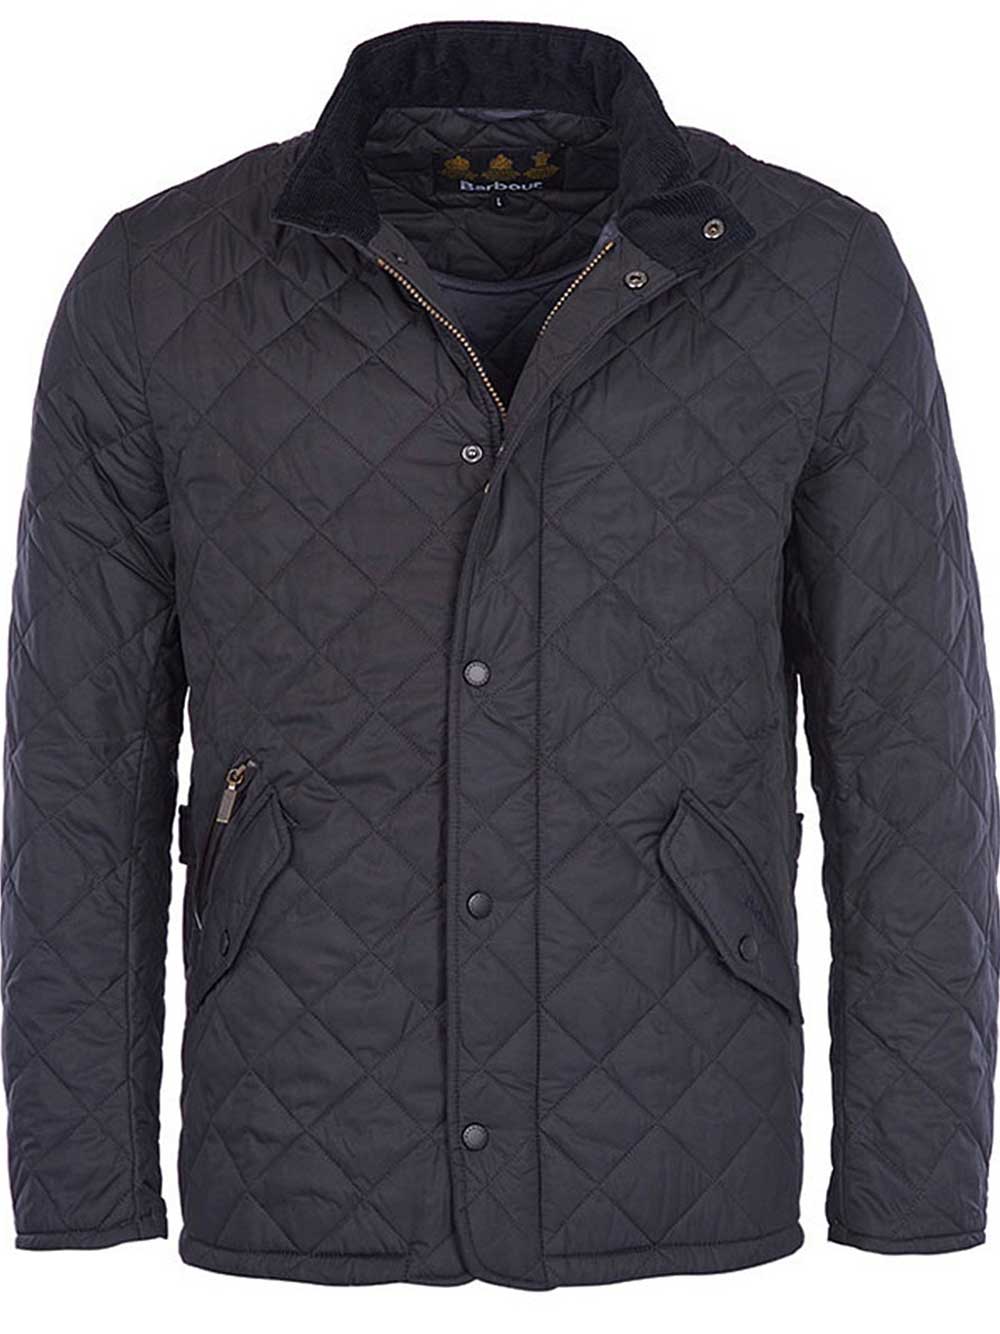 BARBOUR Jacket - Mens Chelsea Sportsquilt Tailored Fit - Navy